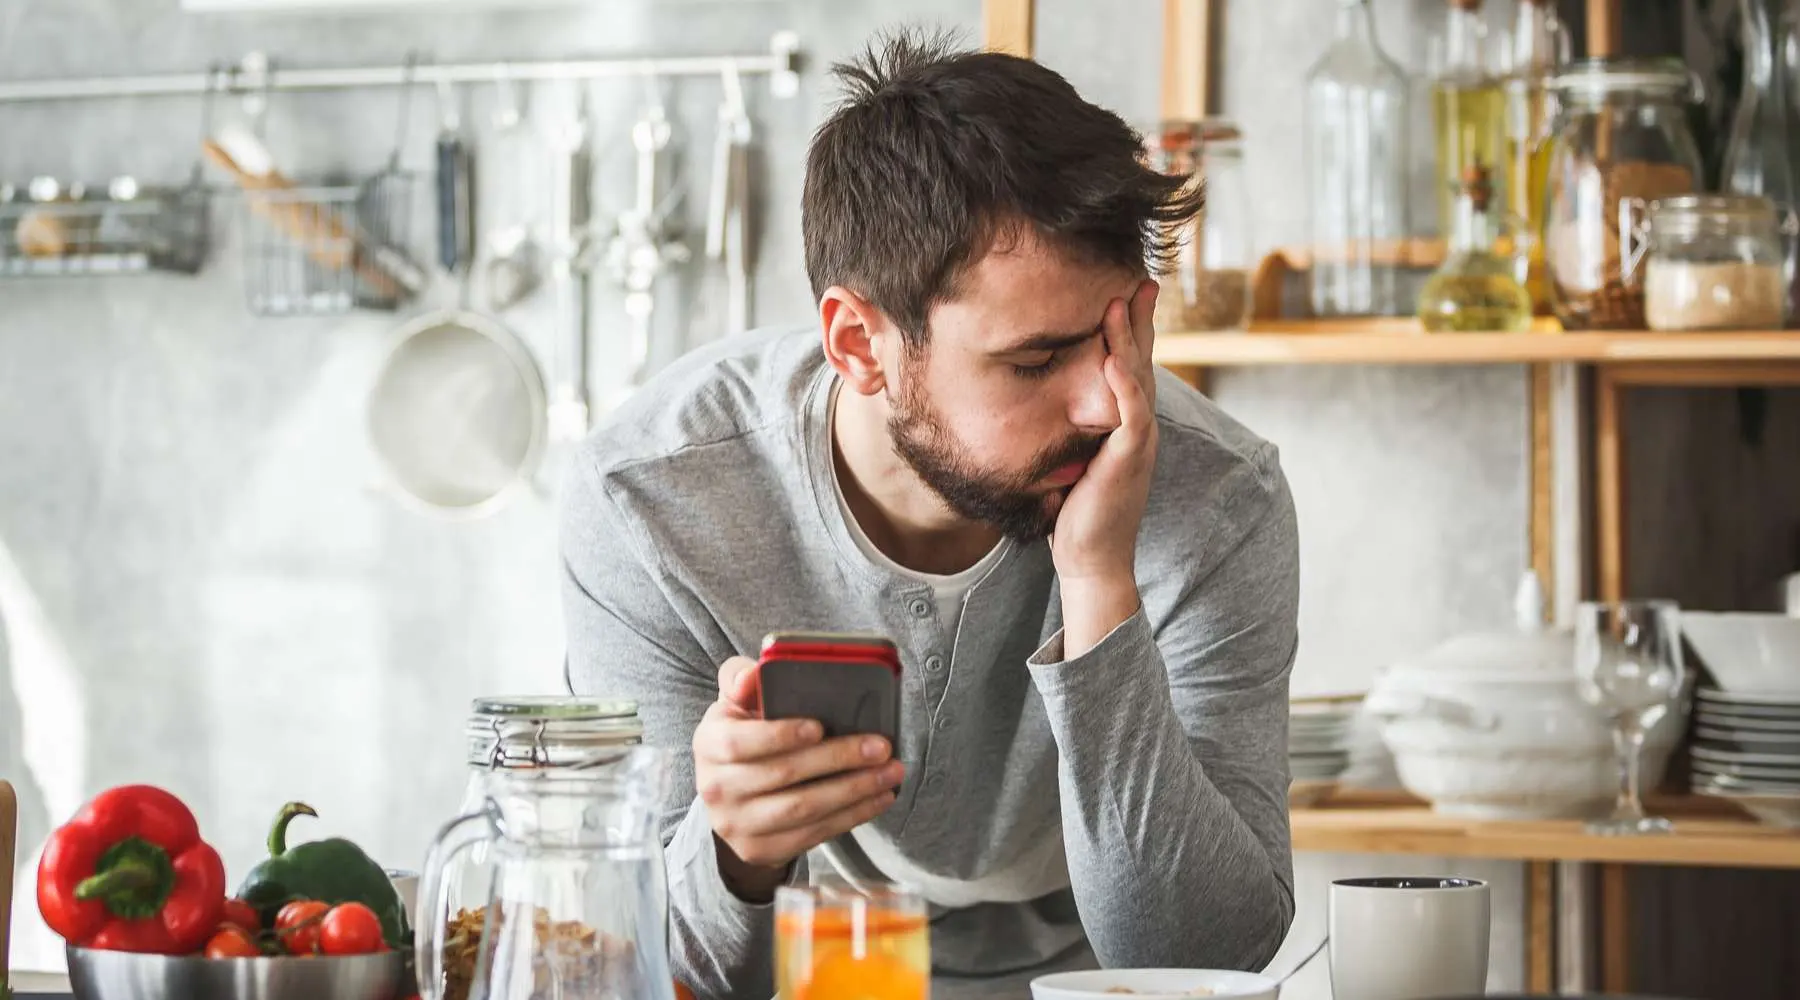 Sad man using smart phone during breakfast at home